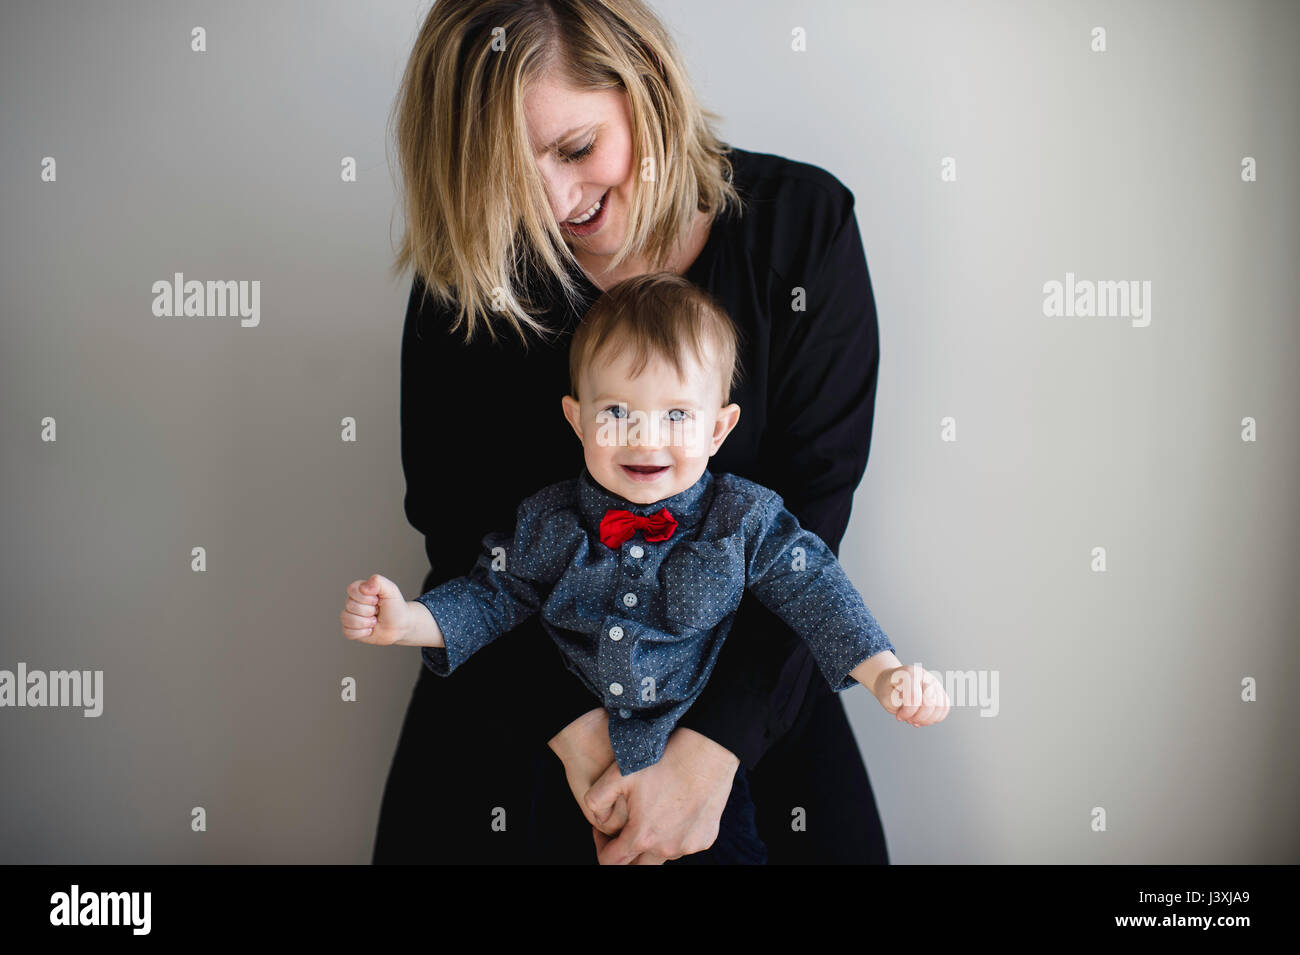 Portrait of male toddler in red bow tie being held by mother Stock Photo